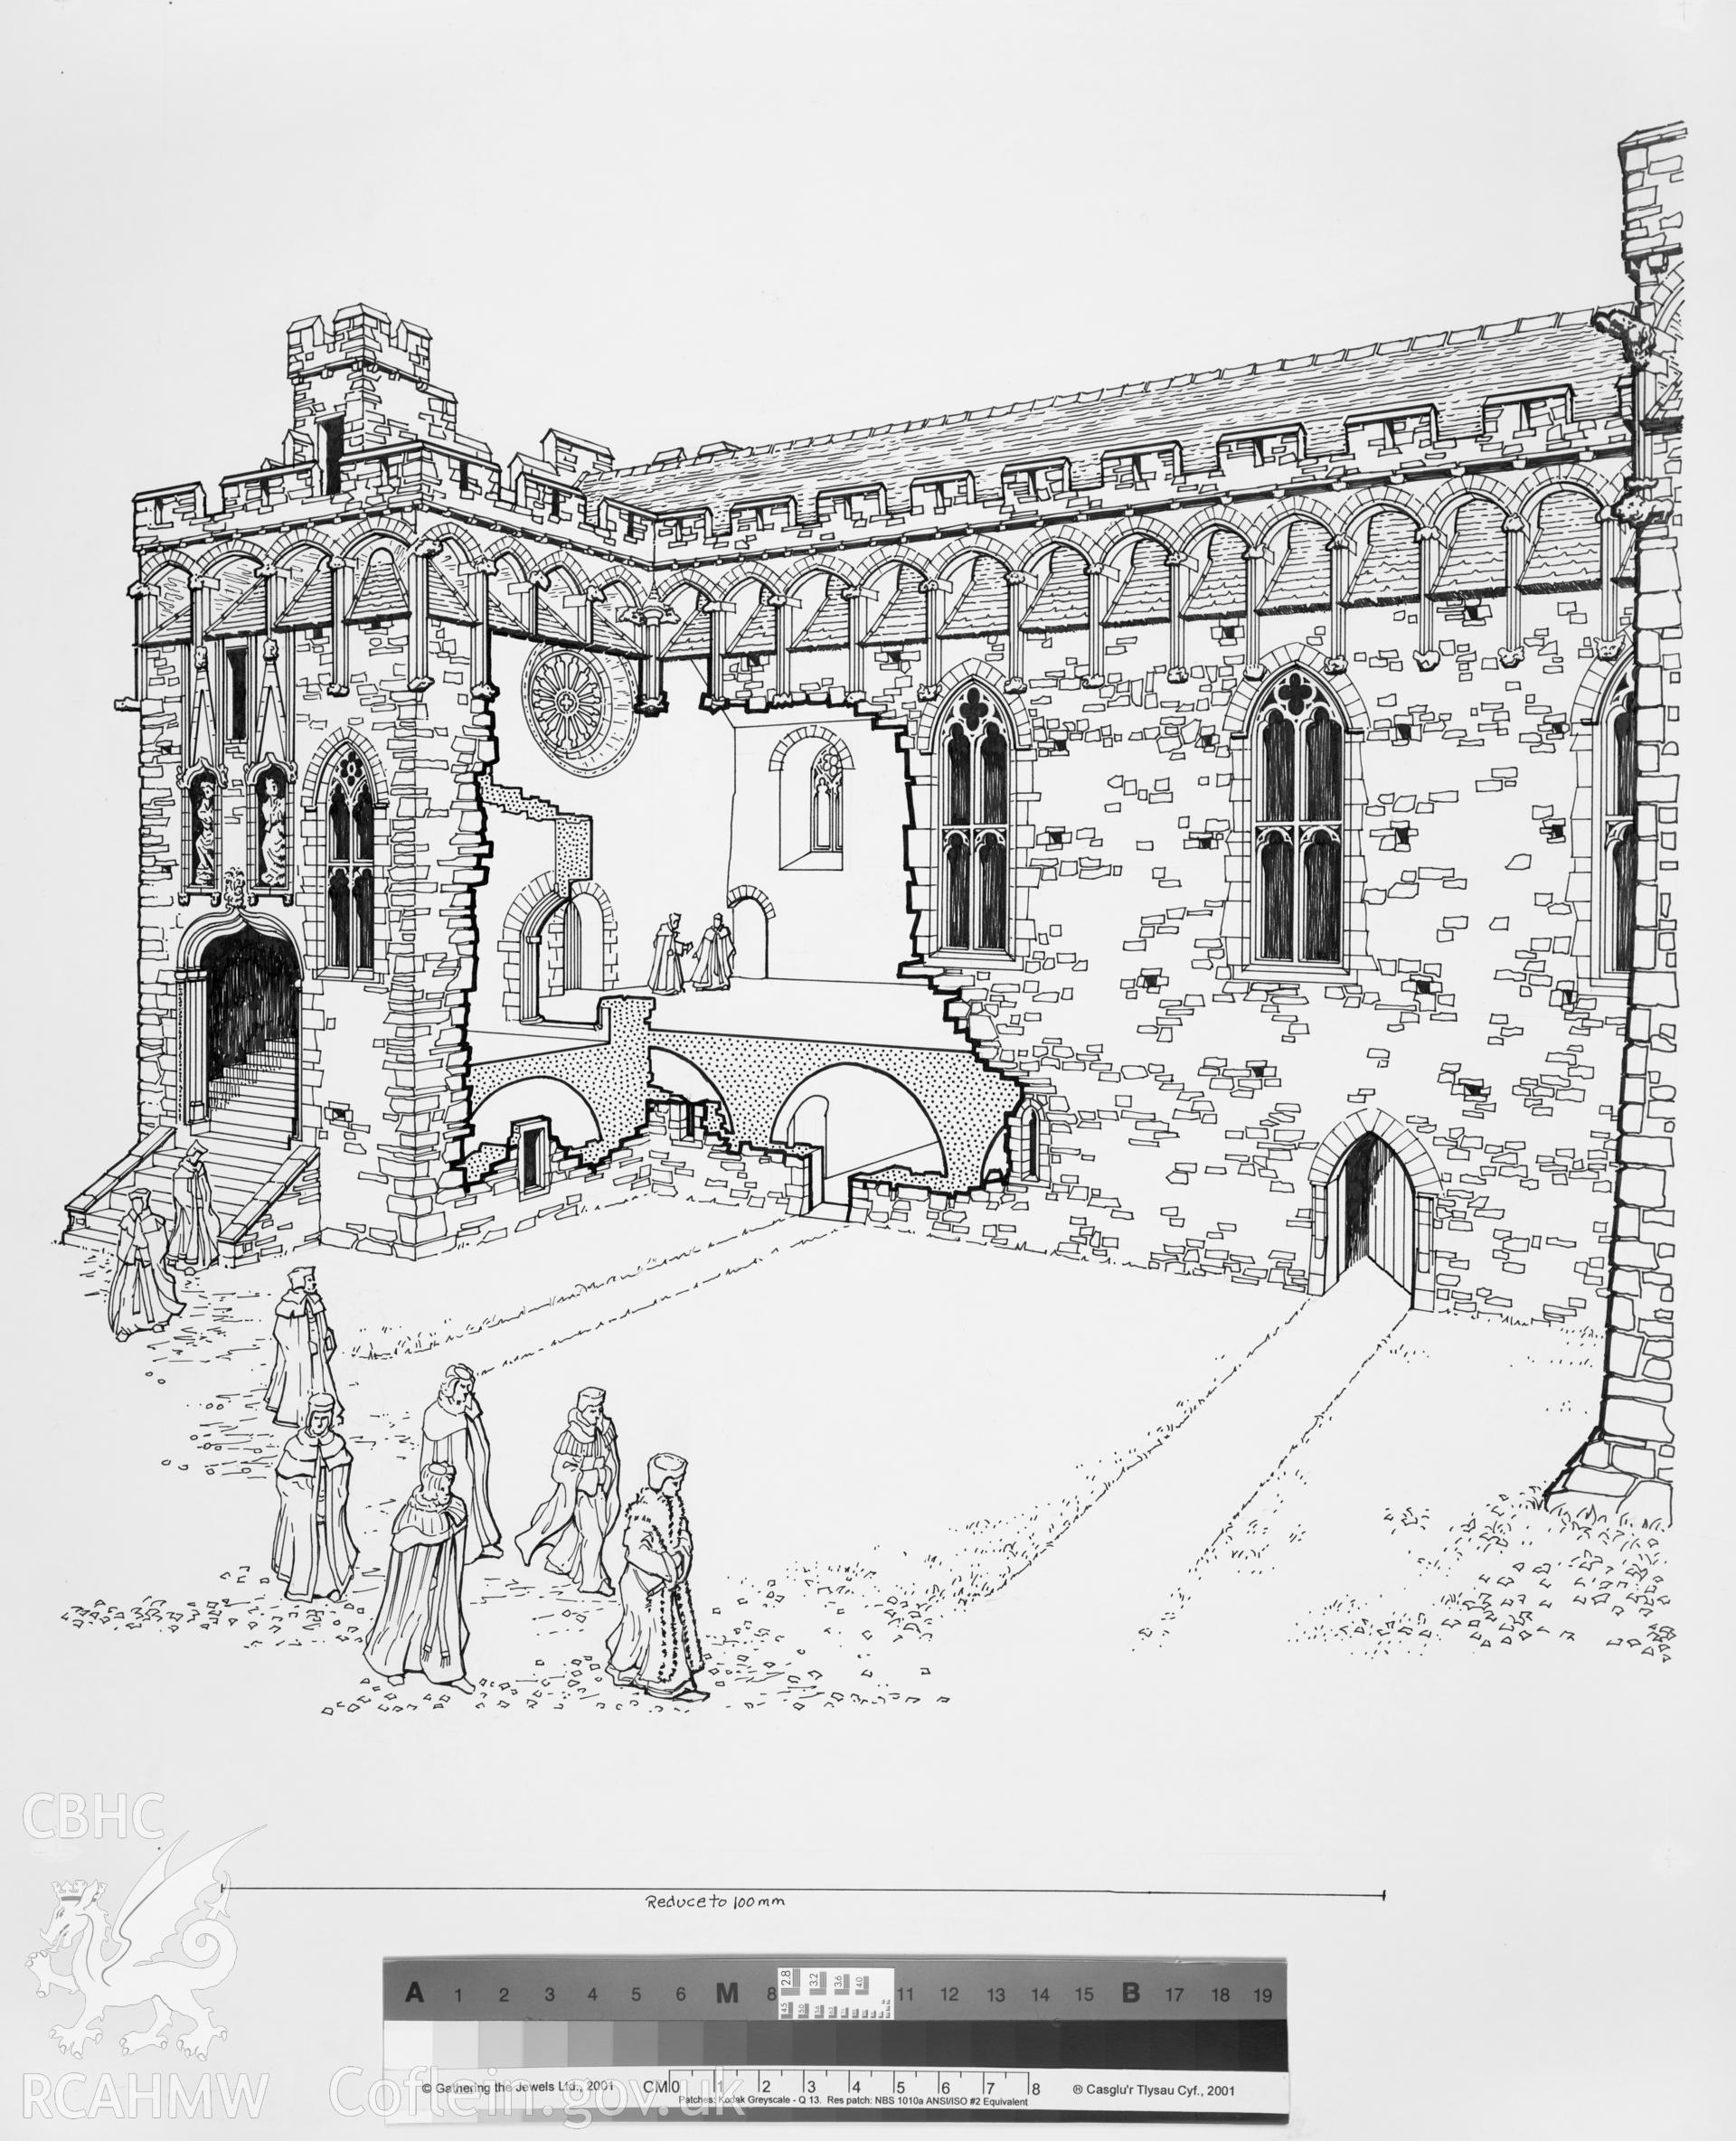 RCAHMW drawing showing reconsruction cutaway of Bishop's Palace, St David's, published in Houses of the Welsh Countryside, fig 1.